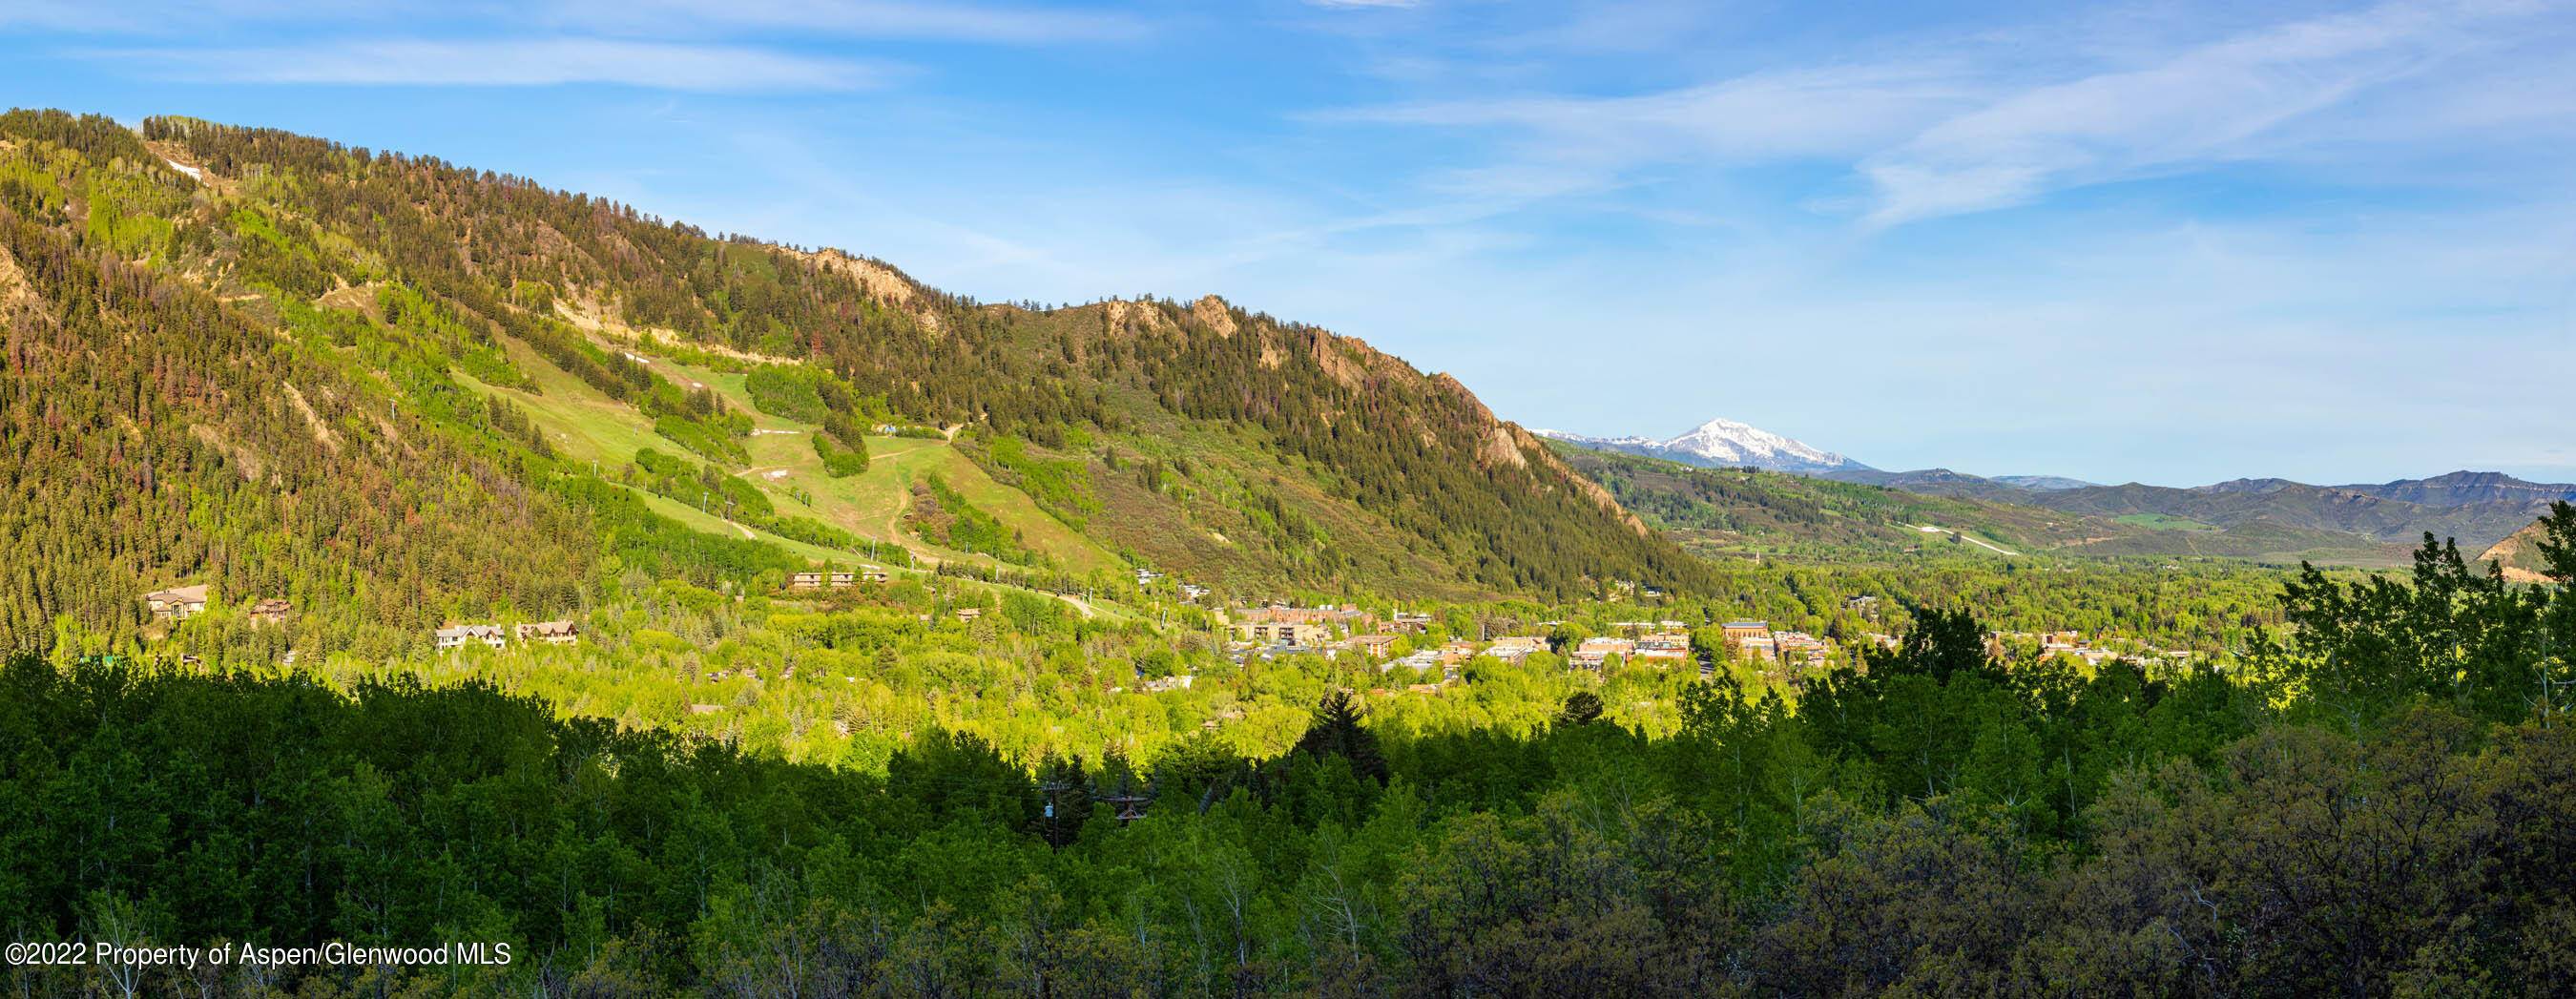 Property in possession of City of Aspen demo permit In the early years of Aspen's skiing history, the founding families of the community selected the very best parcels to build ...